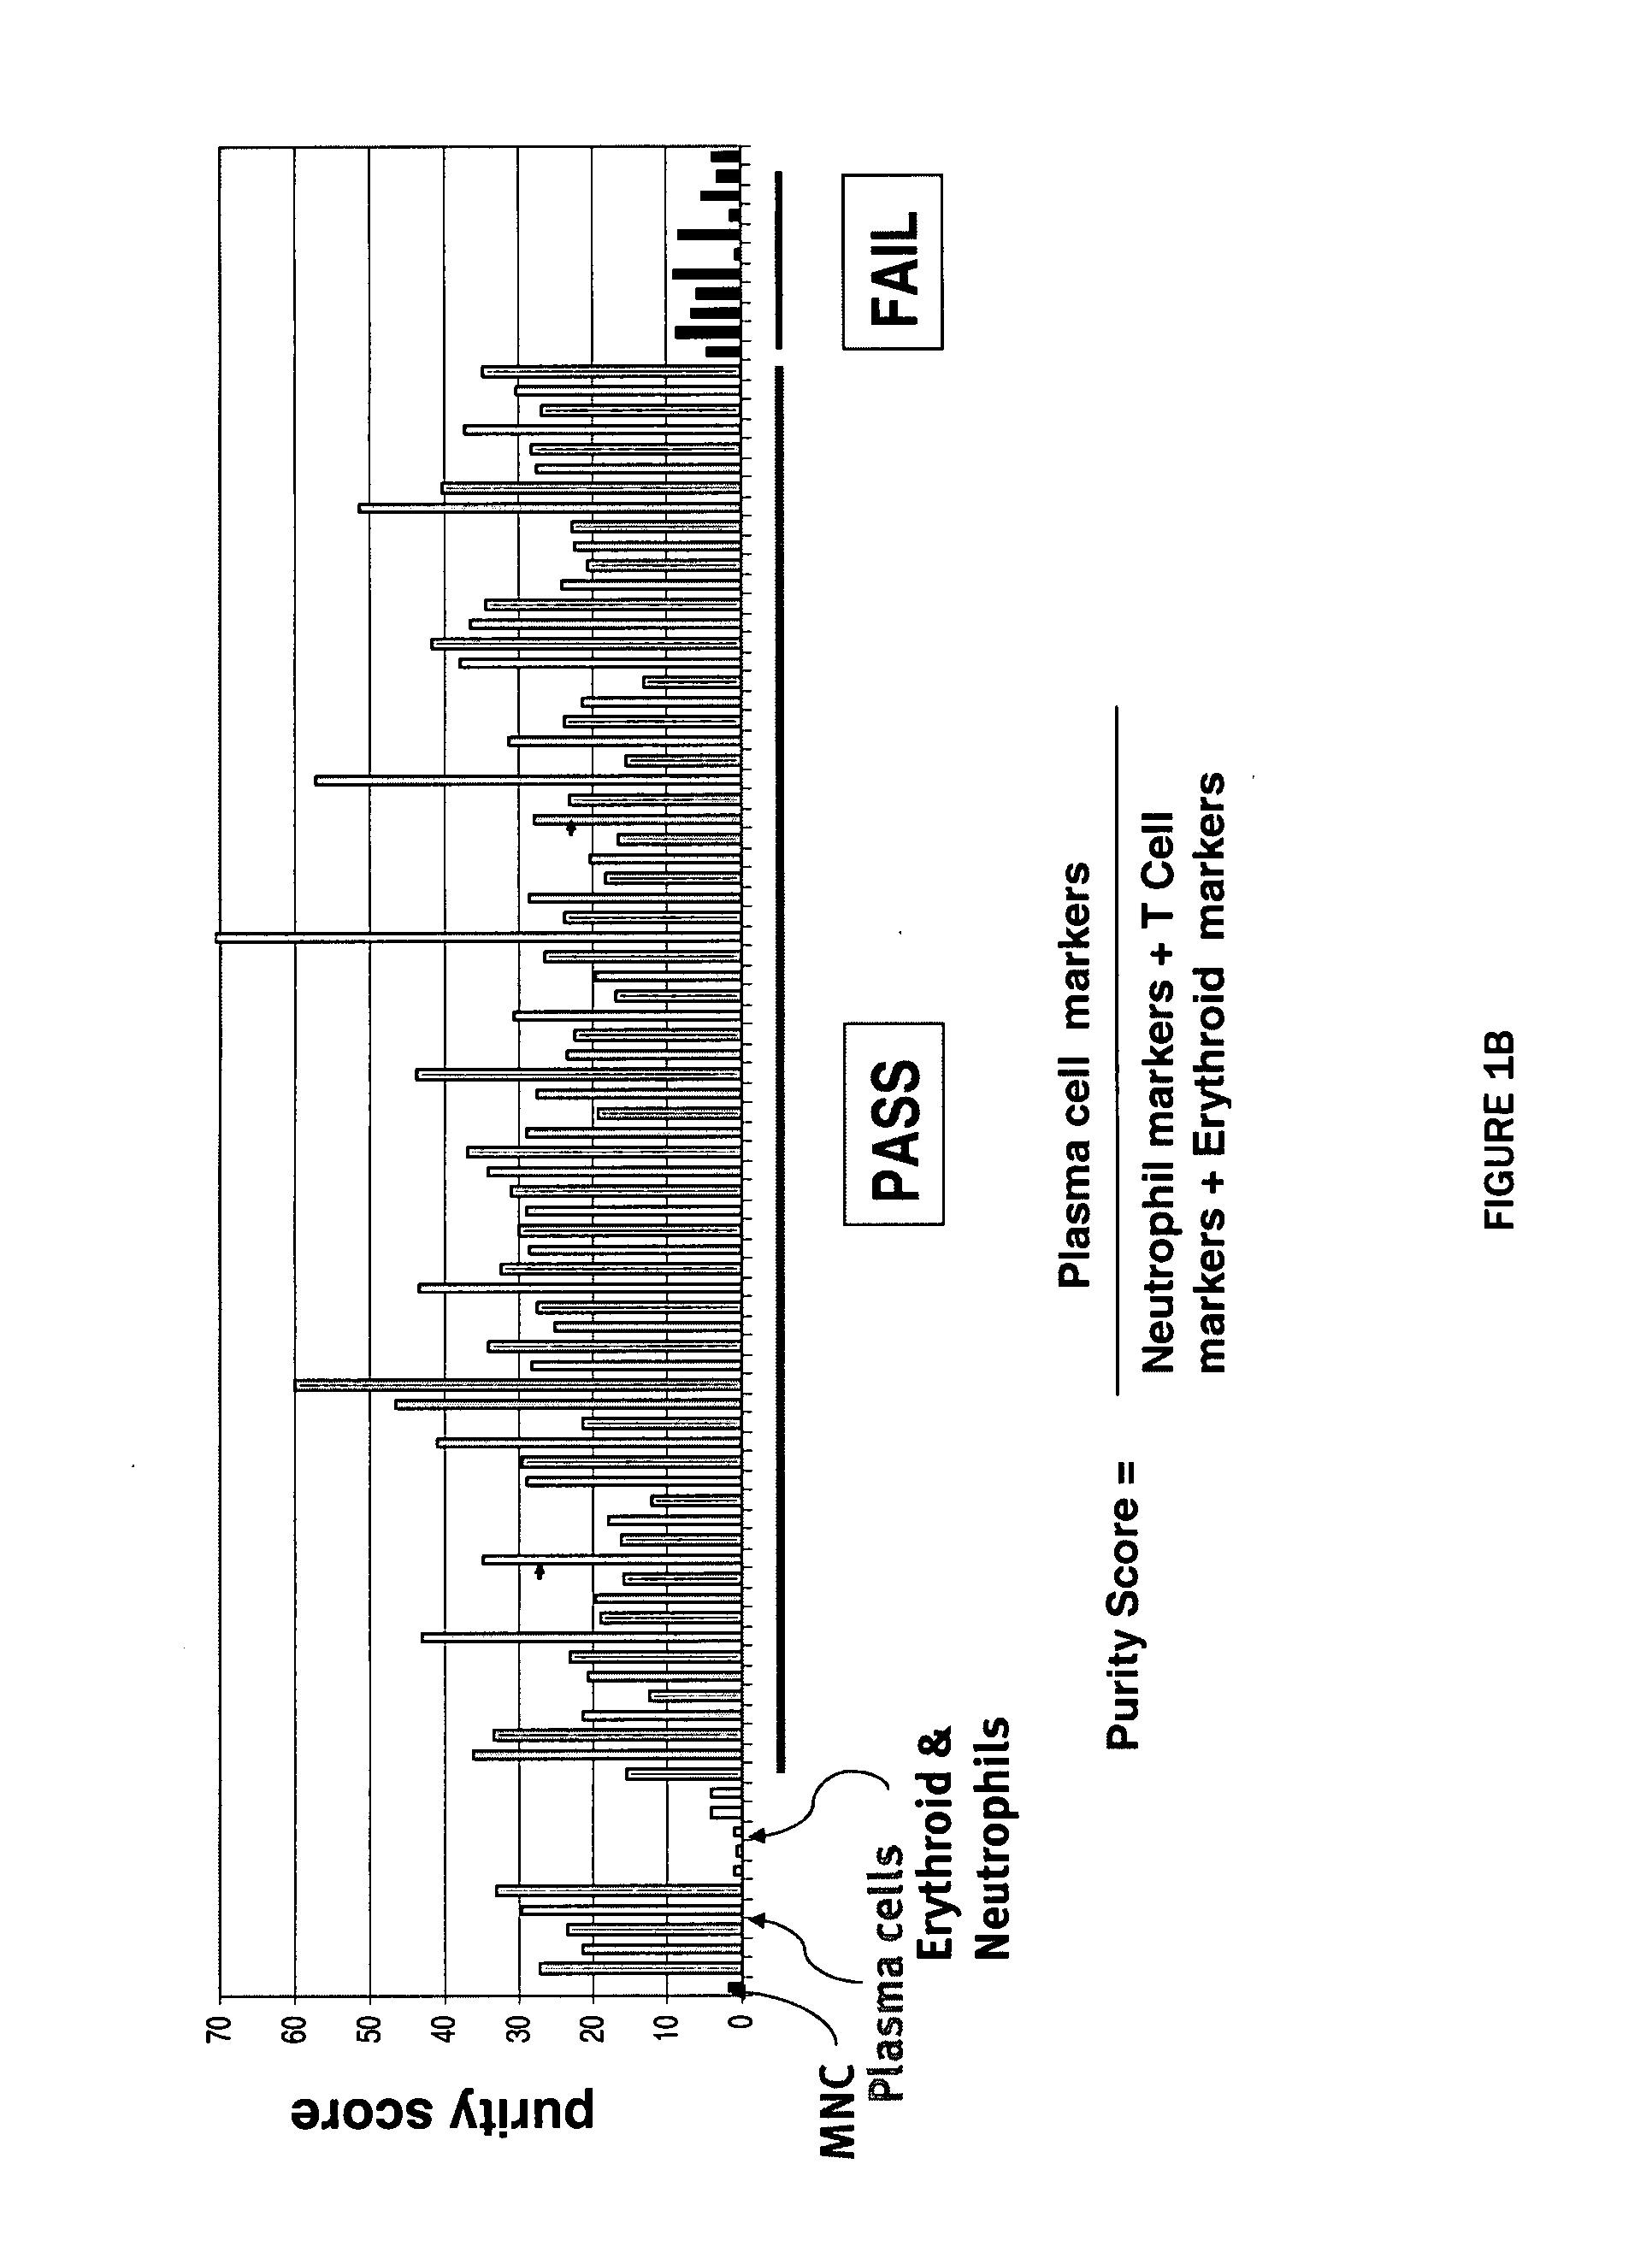 Methods for the identification, assessment, and treatment of patients with cancer therapy